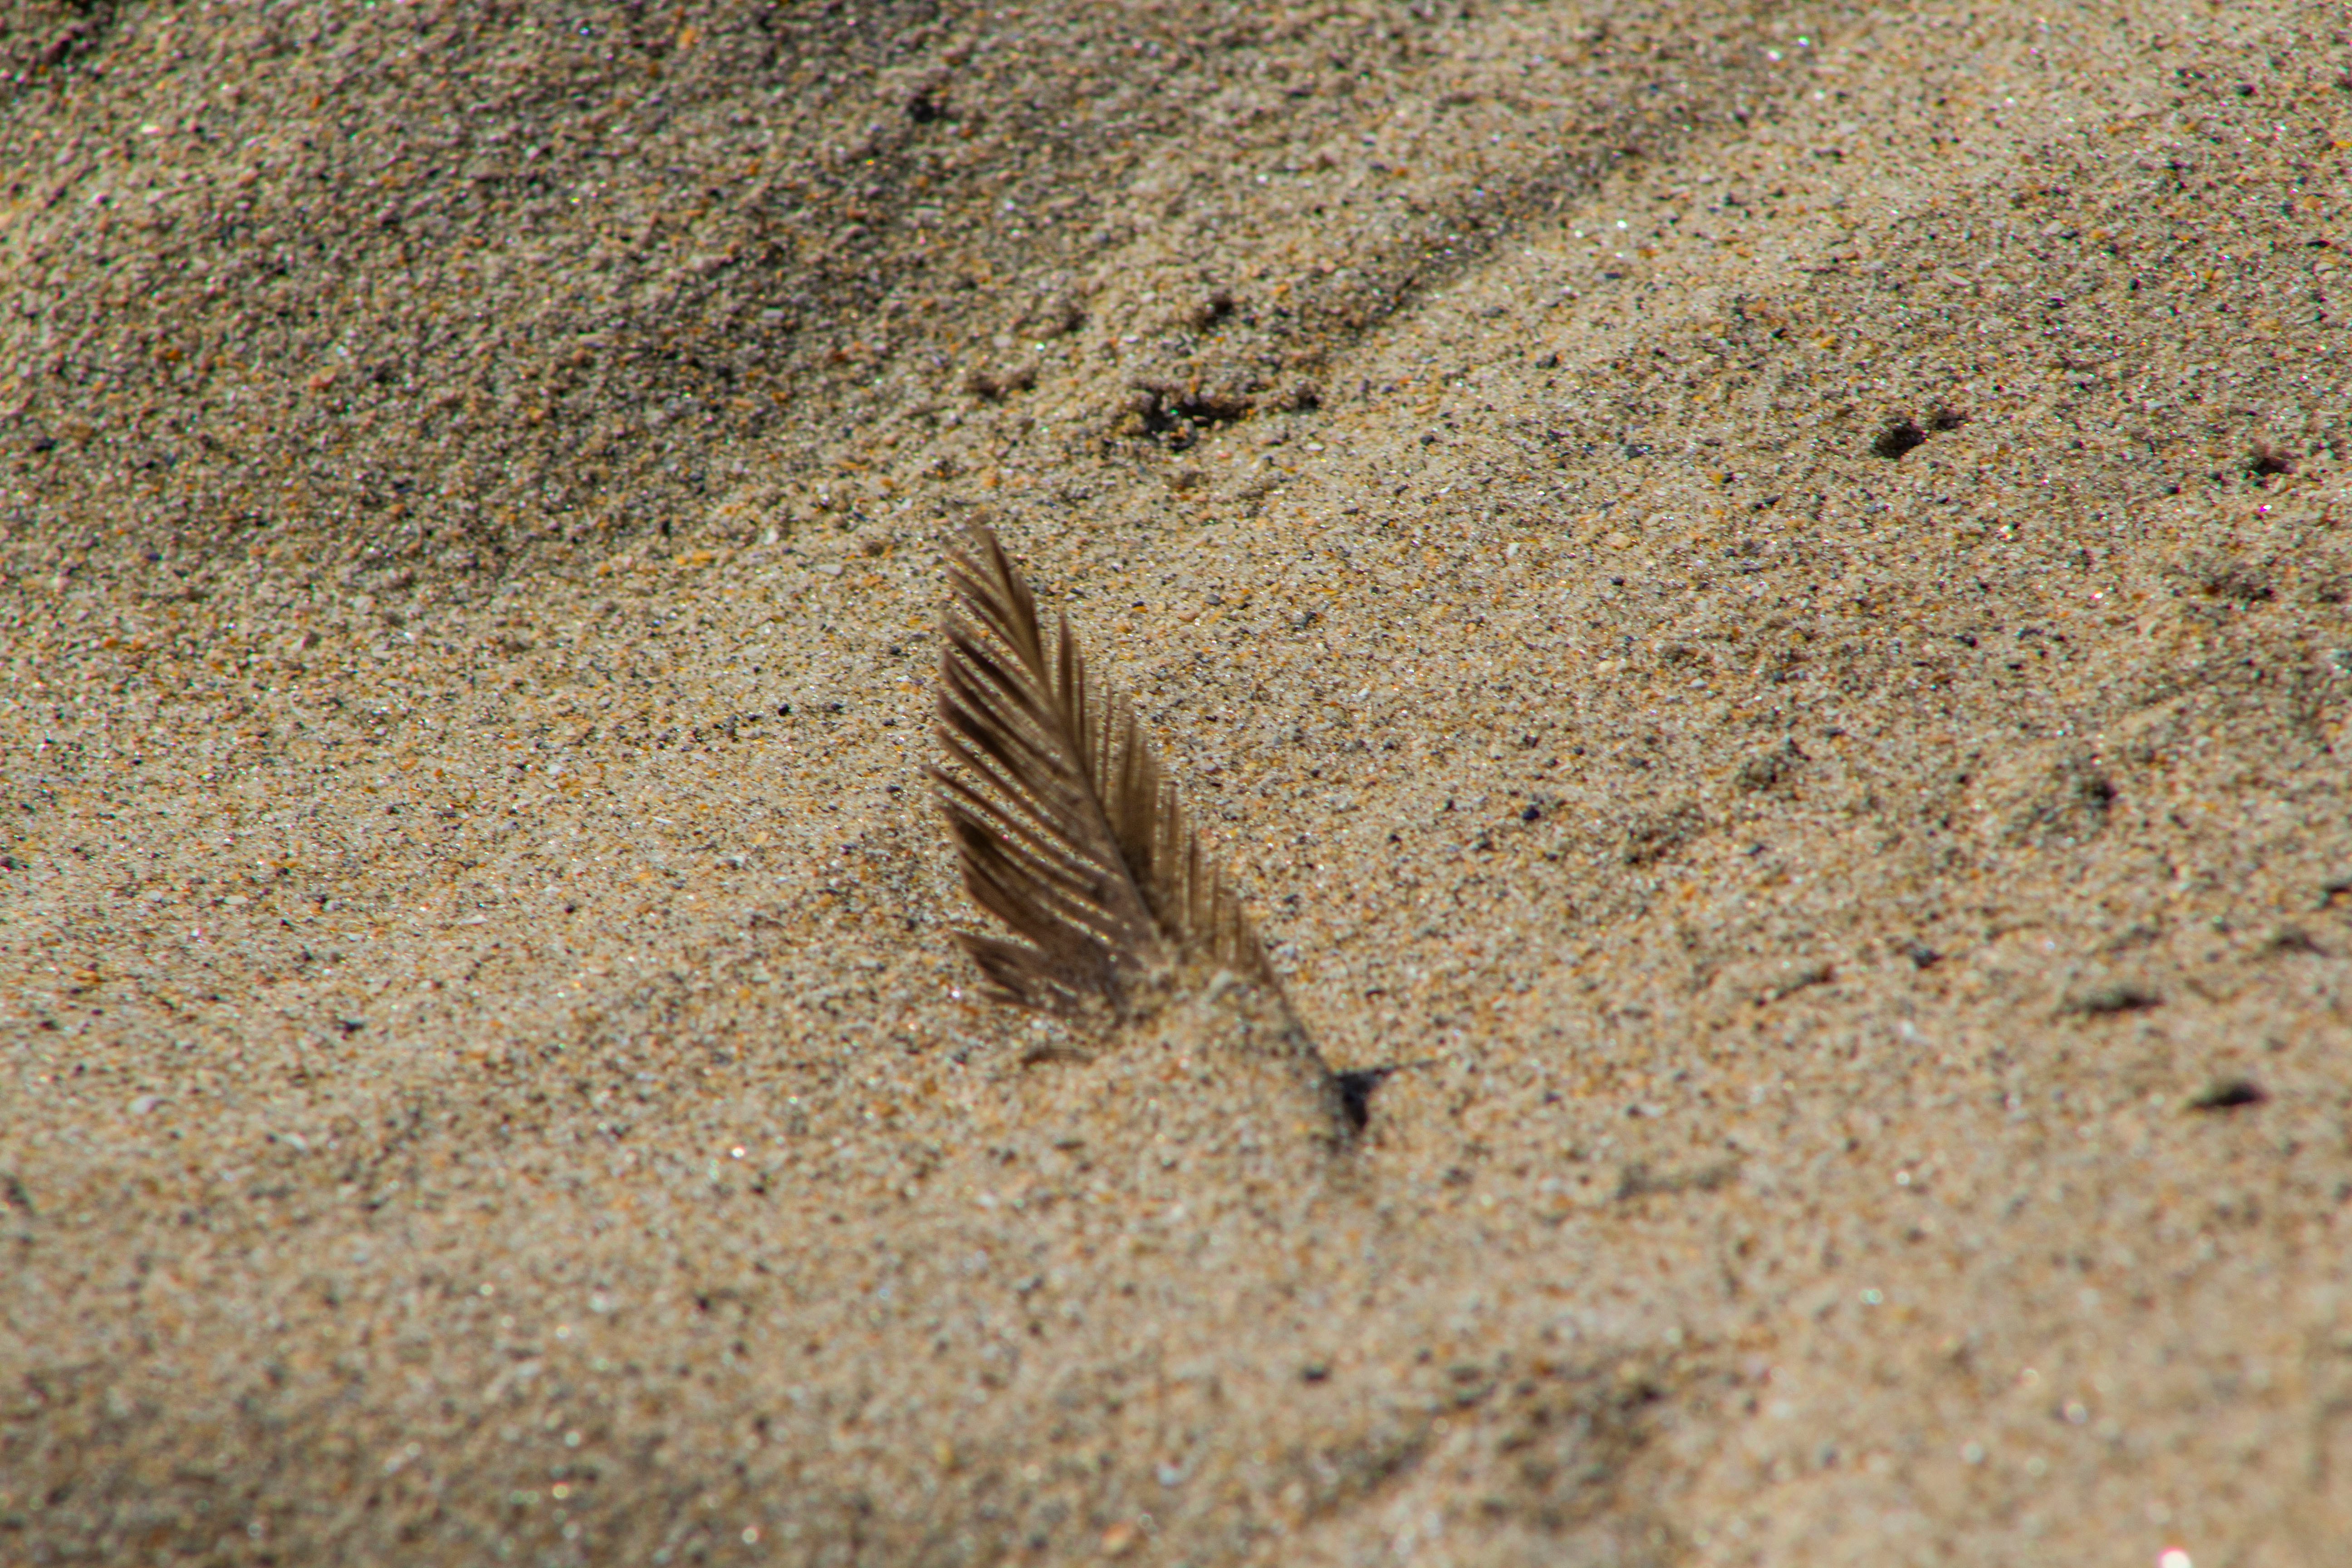 A single feather buried in the sand.